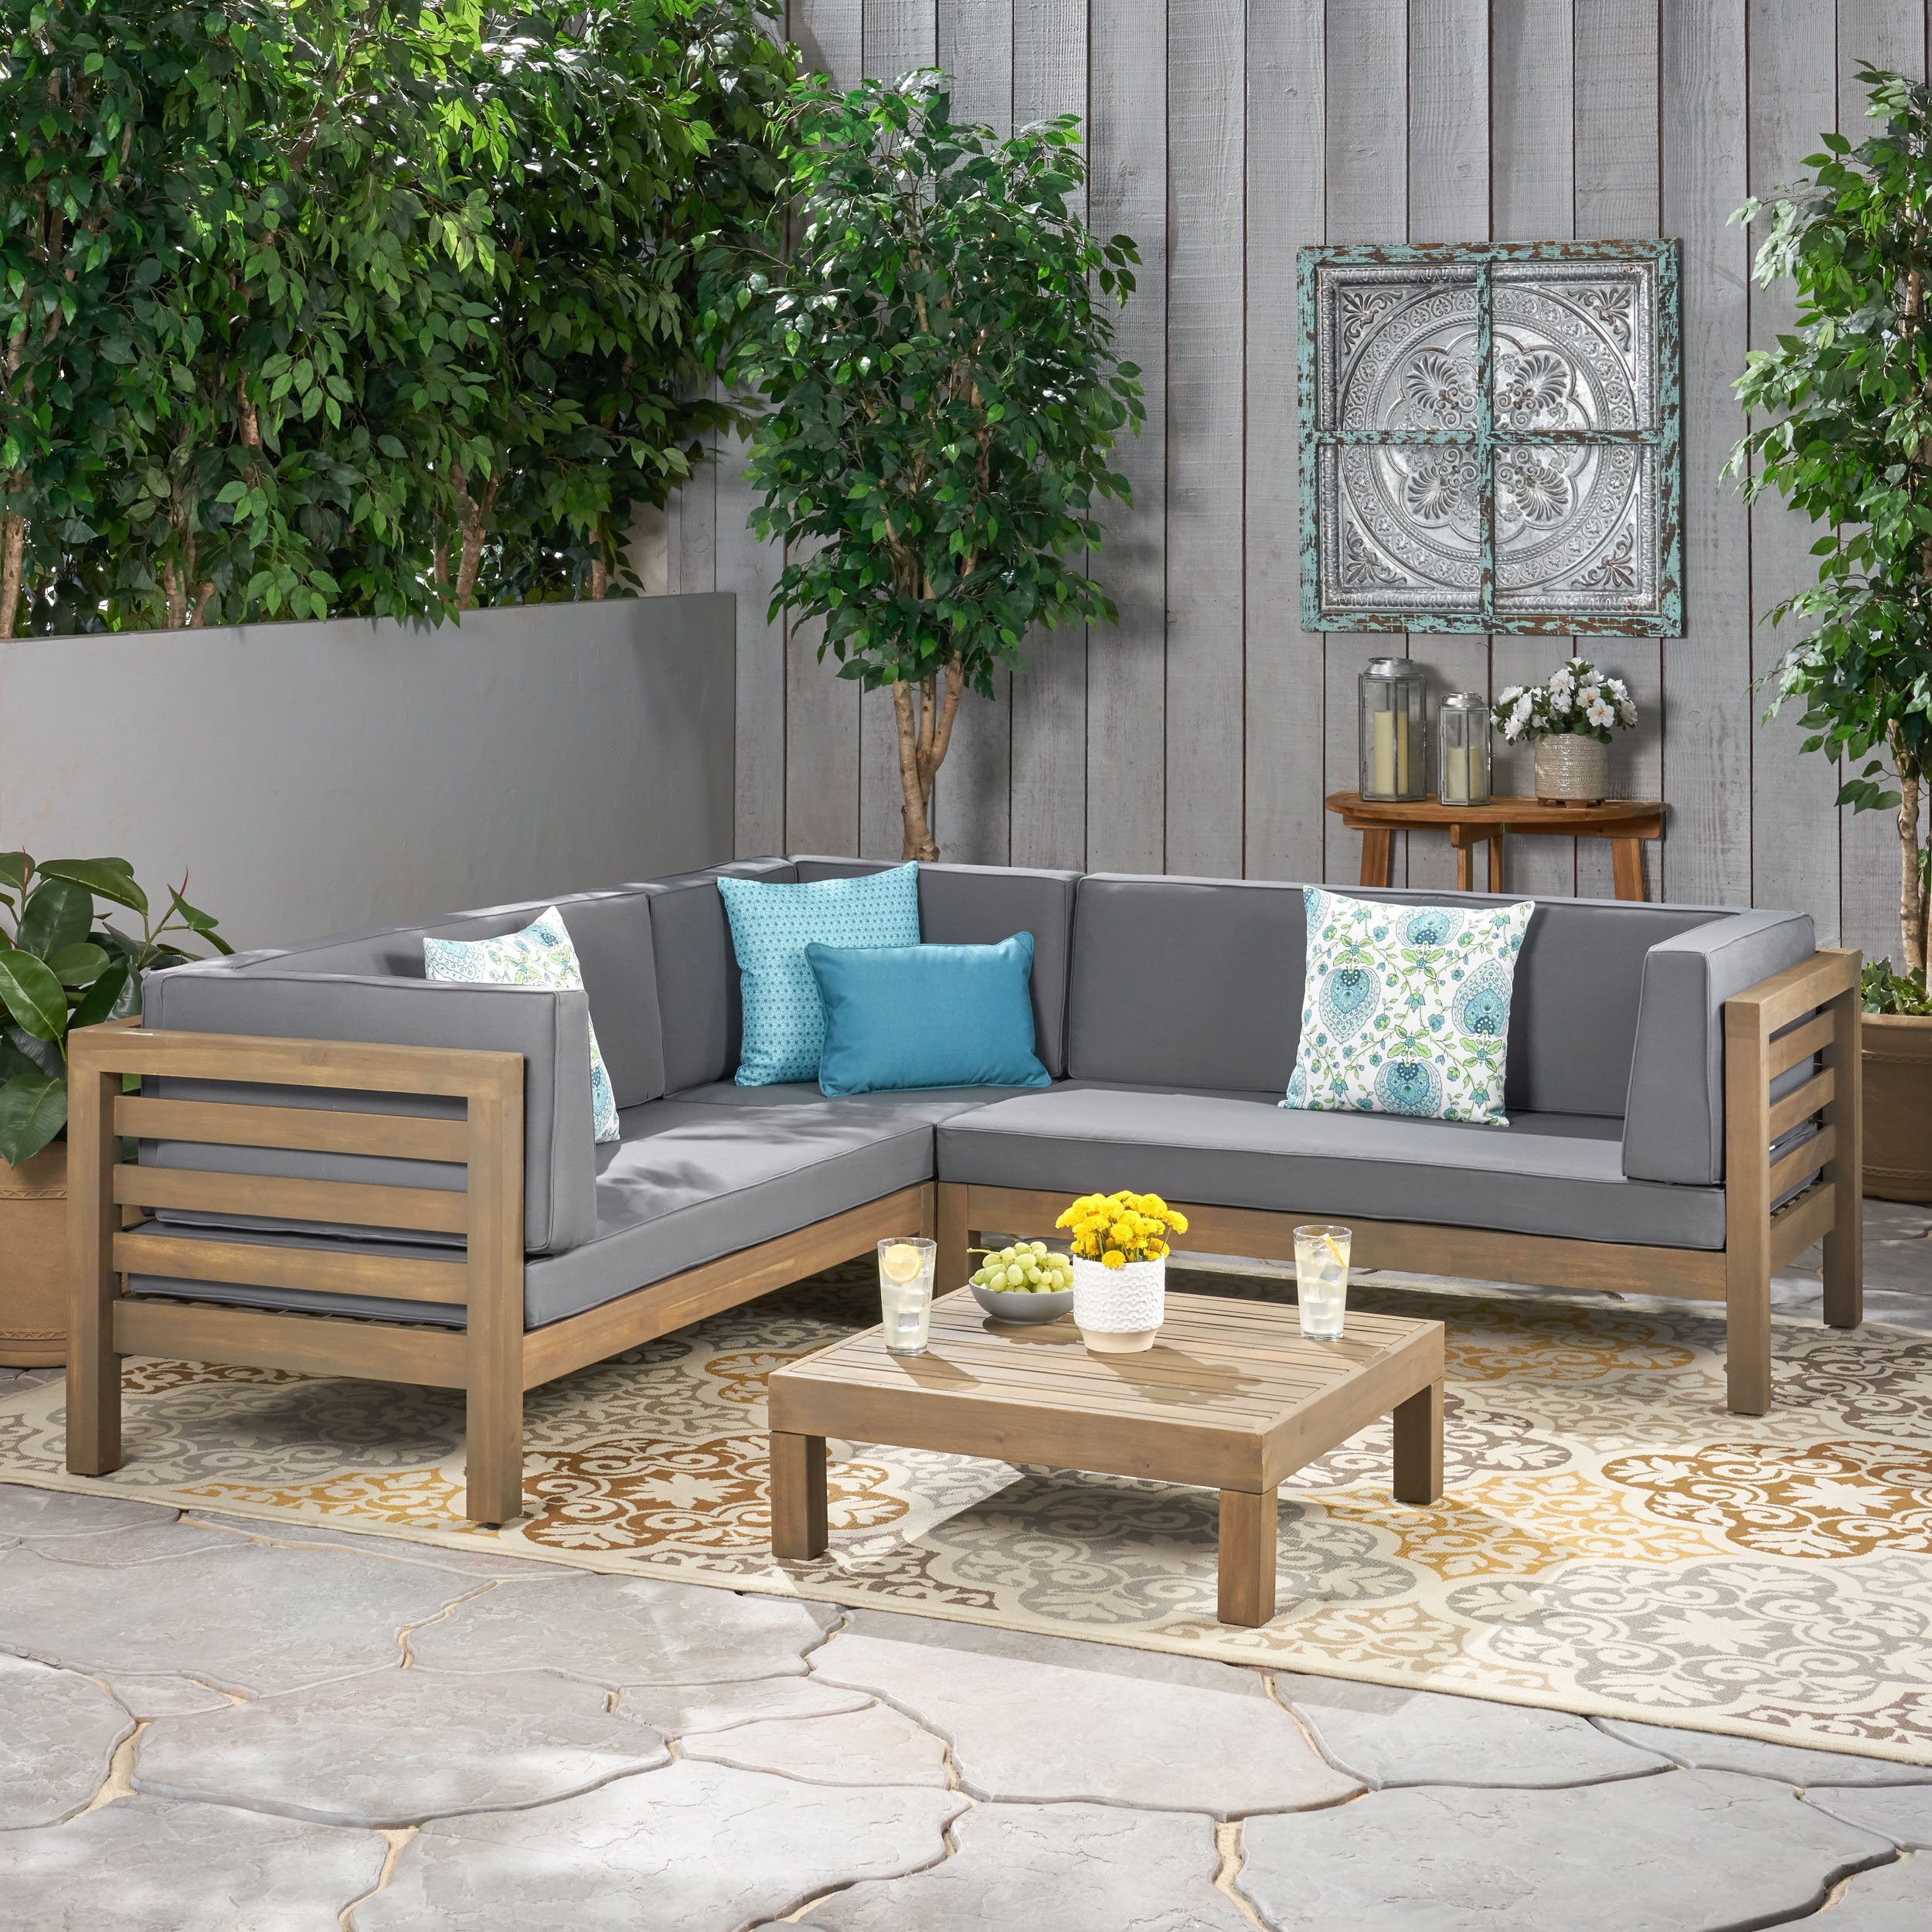 Ravello 4 Piece Outdoor Wooden Sectional Set With Dark Grey Cushions - Gray, Gray